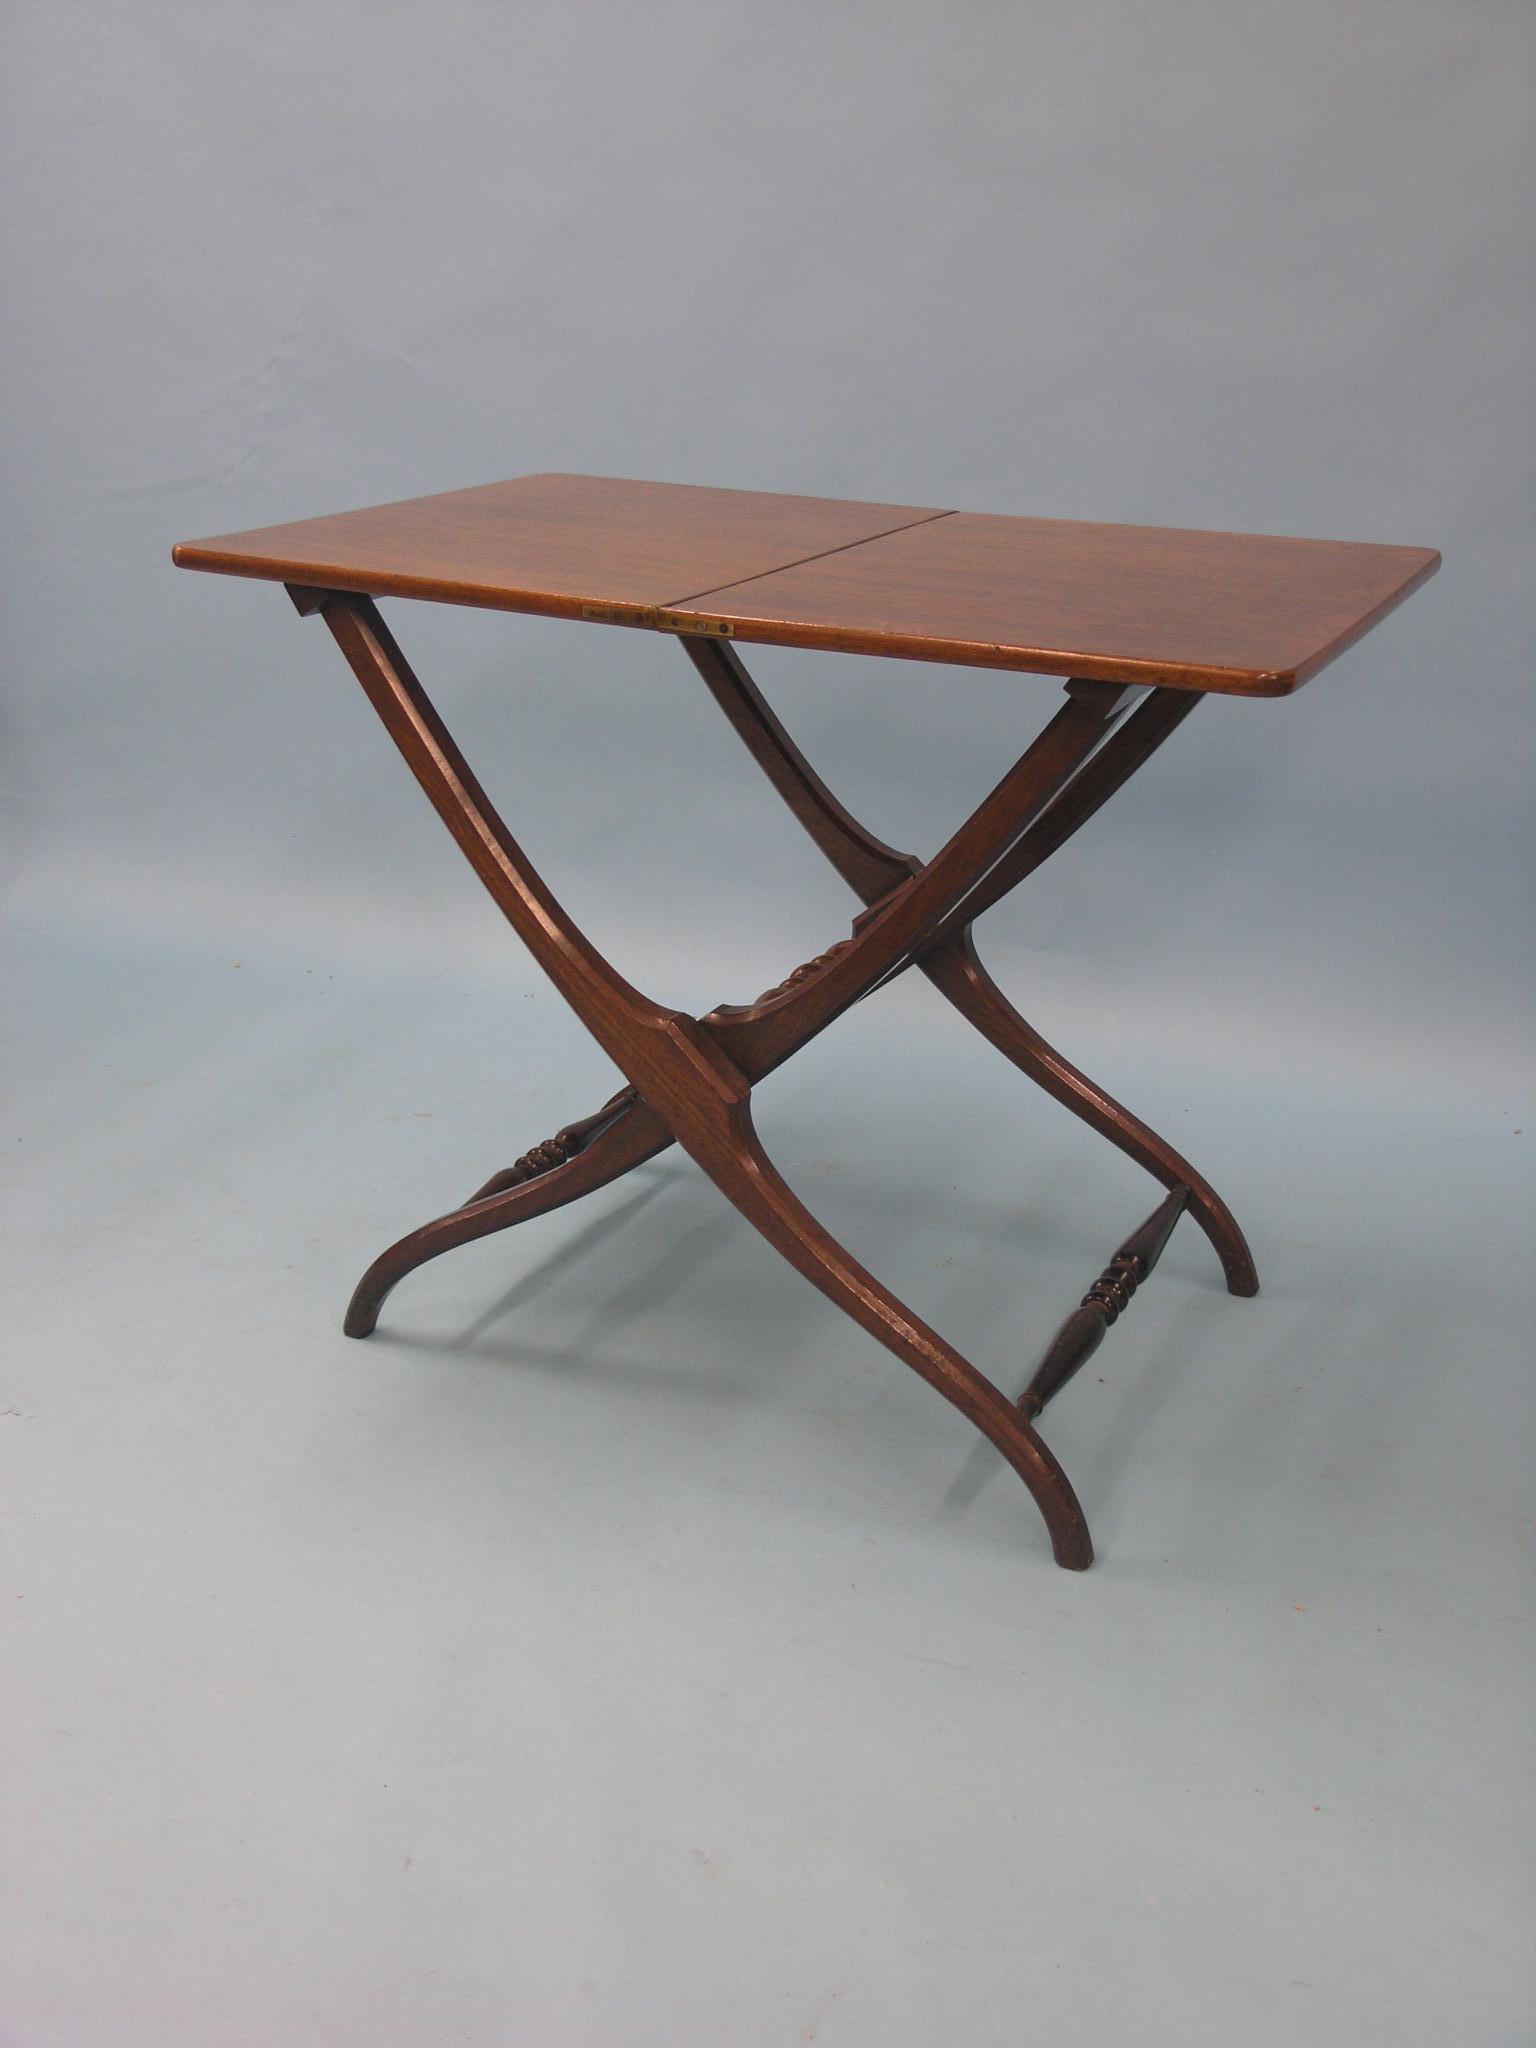 A Victorian mahogany patent-action folding table, turned underframe with Horne Patent locking